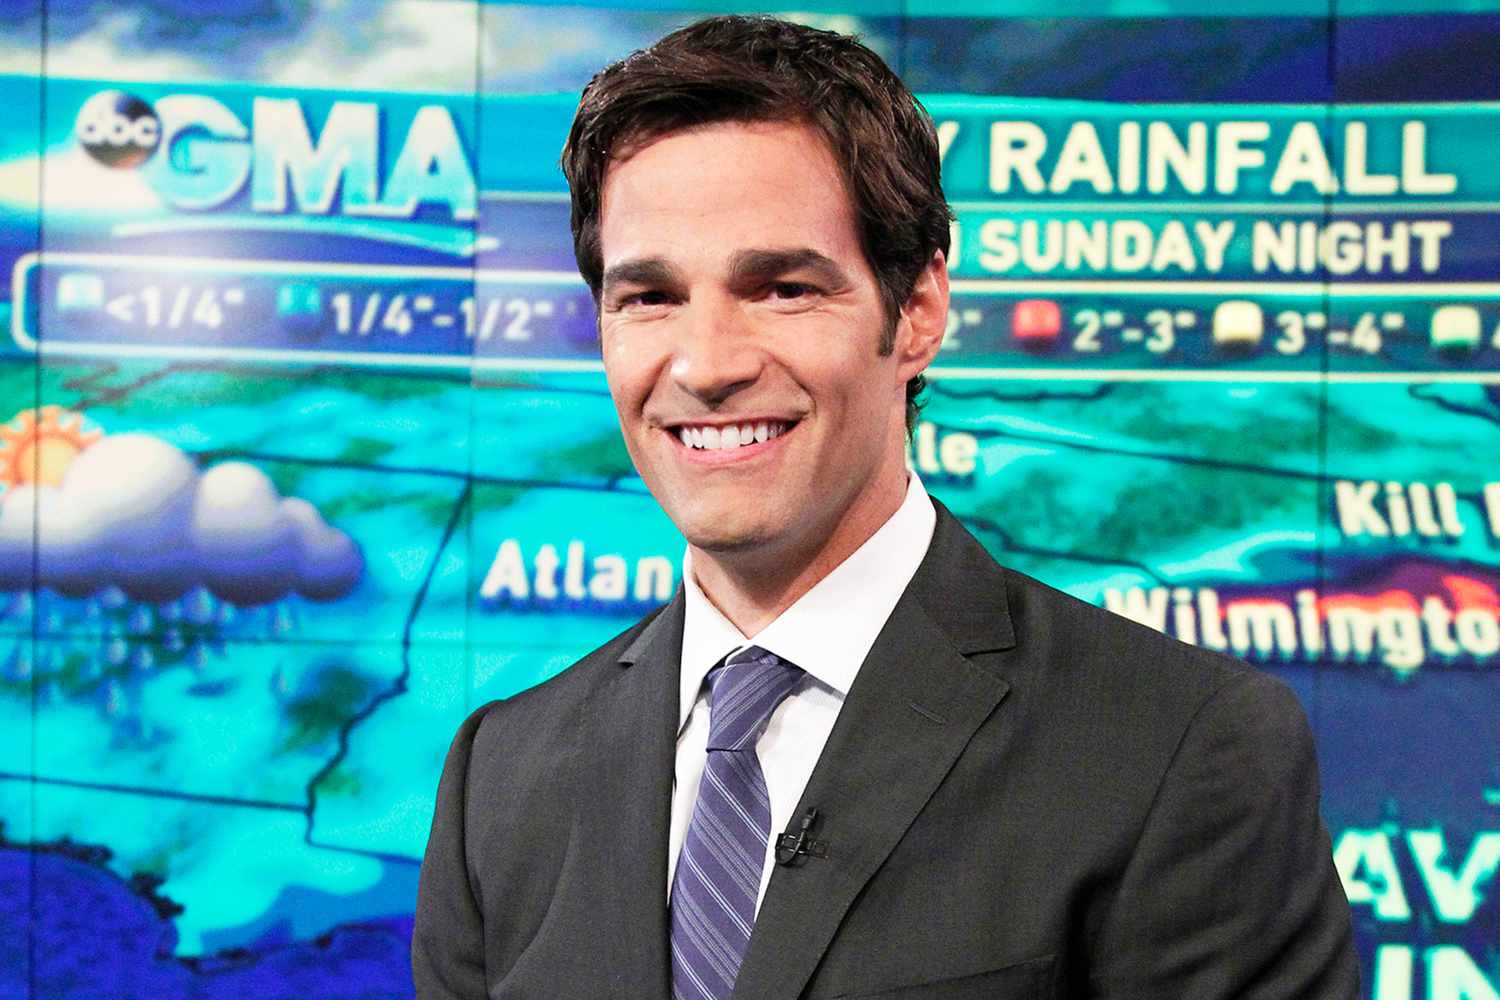 Rob Marciano out as ABC News, 'GMA' meteorologist after 10 years